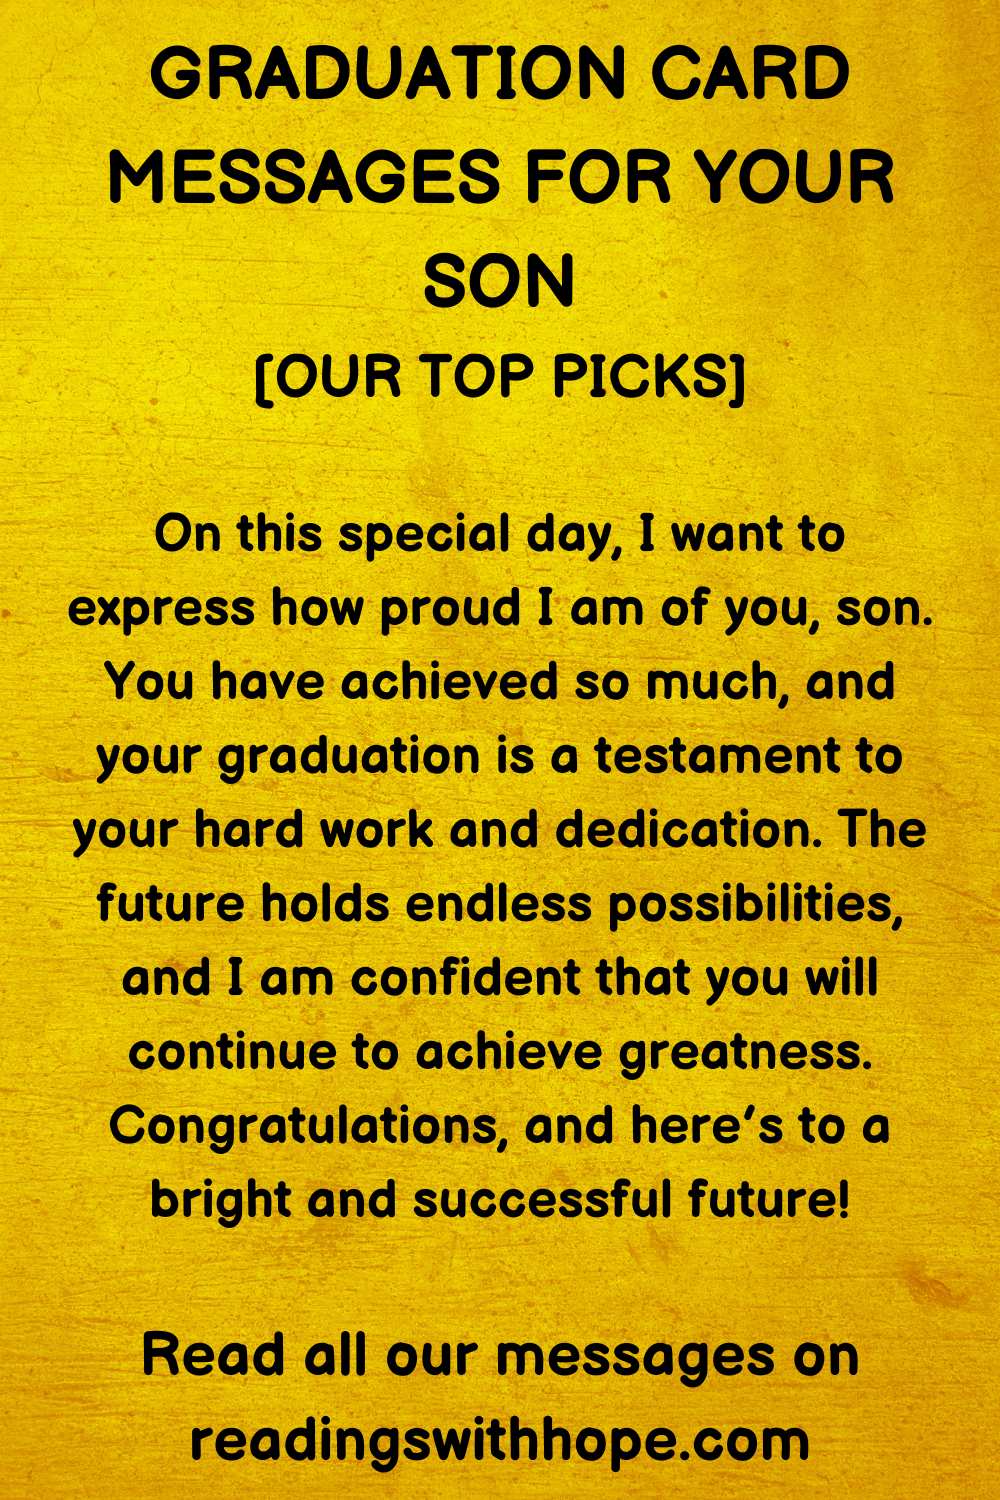 Graduation Card Message for Son 2